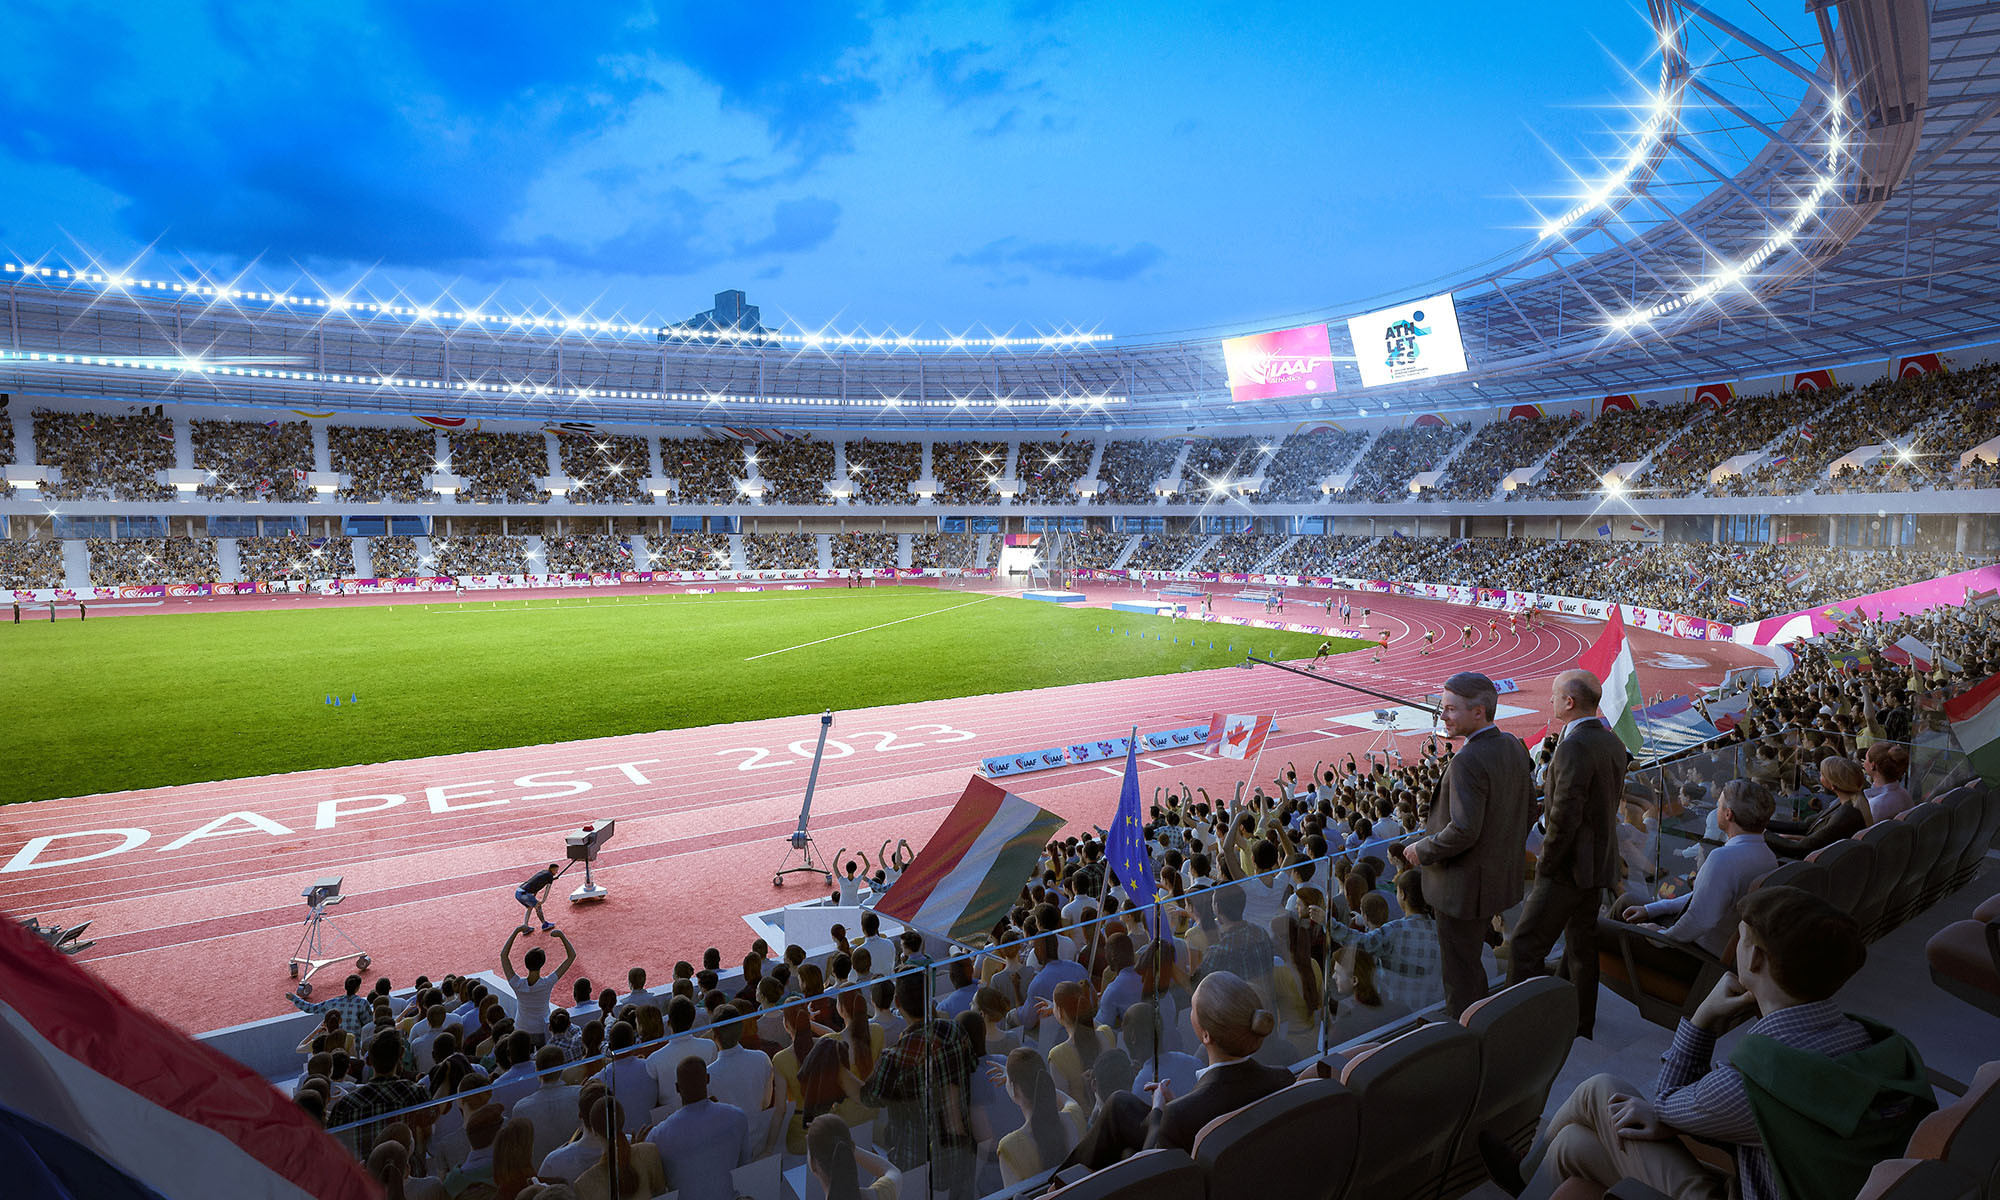 Budapest wants to deliver major events, like the 2023 IAAF World Championships in a 